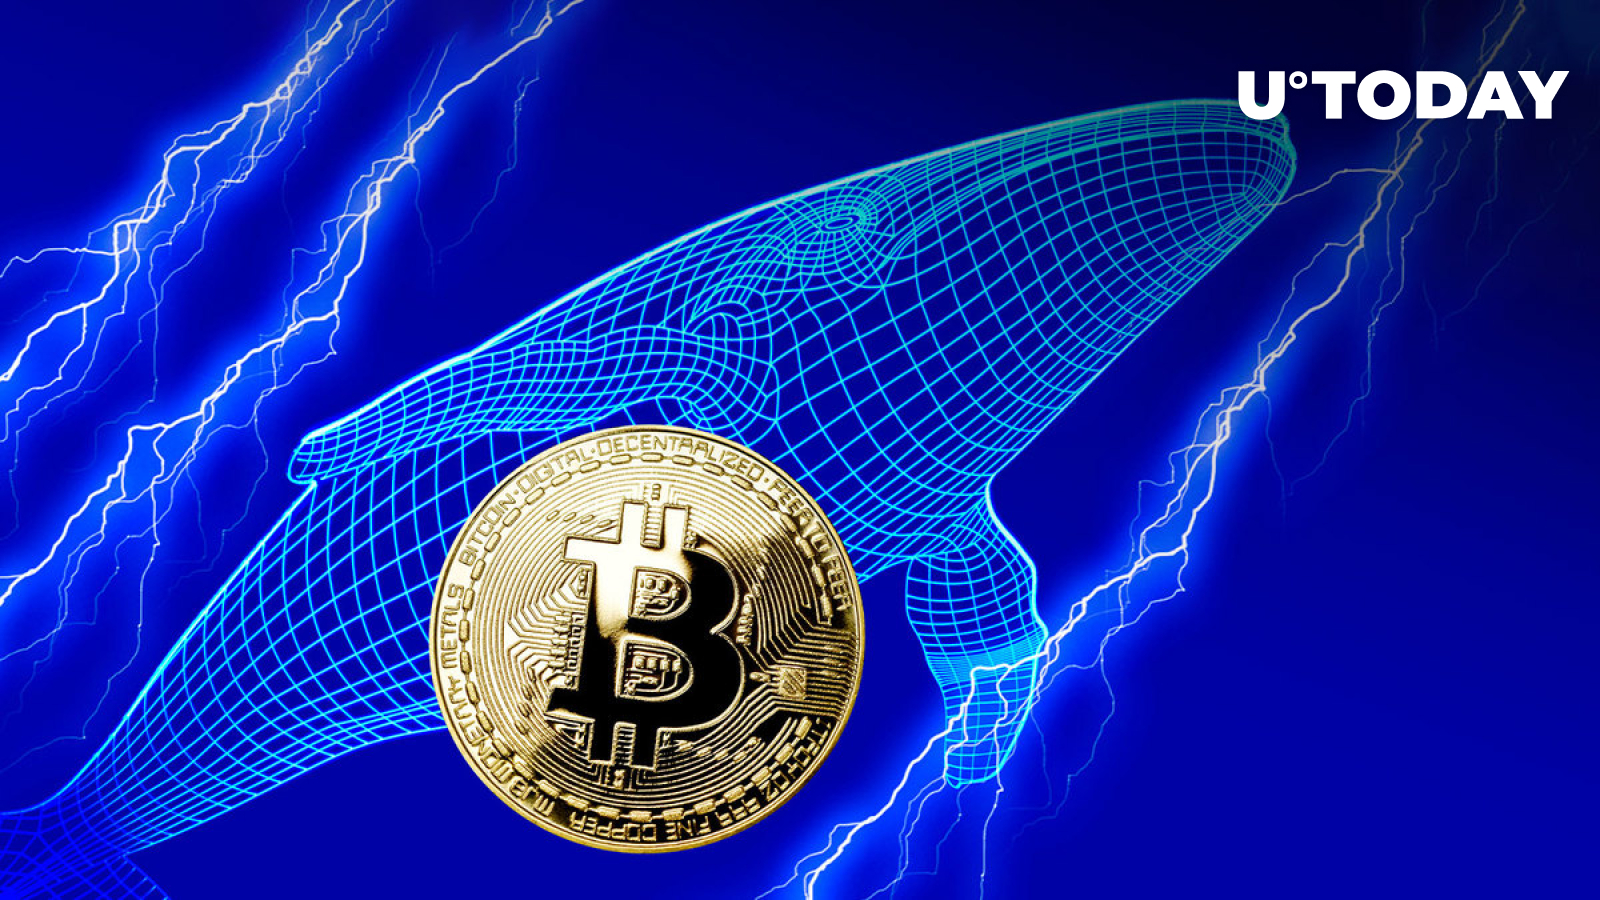 100,000 BTC Sold or Redistributed by Whales in Past Two Days: Report